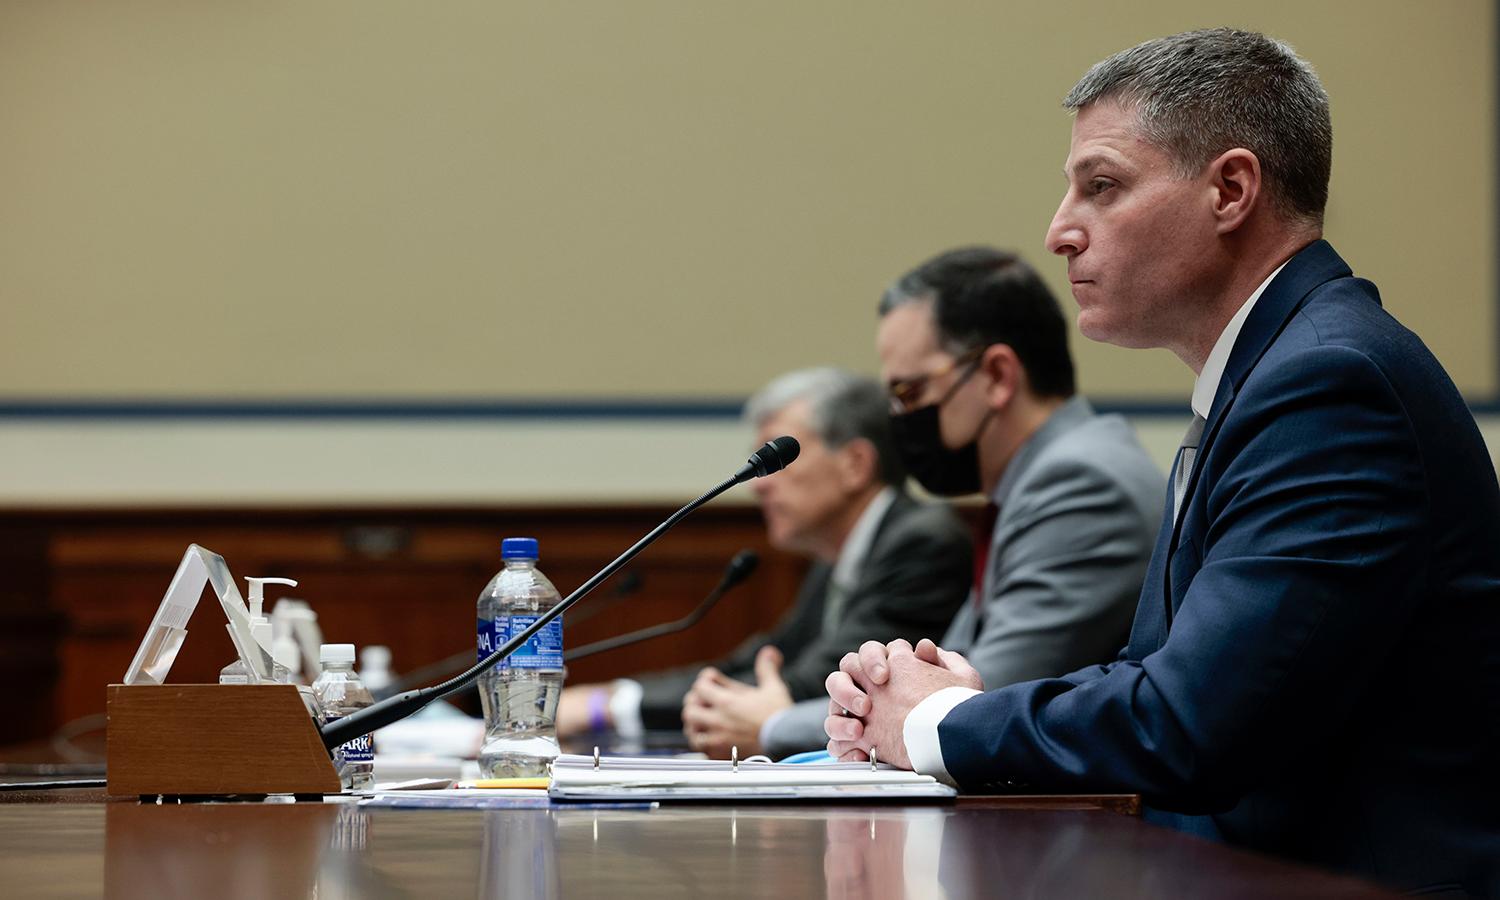 Bryan Vorndran, assistant director of the FBI&#8217;s Cyber Division, speaks at a hearing with the House Committee on Oversight and Reform on Nov. 16, 2021, in Washington. On Tuesday, Vorndran asked Congress for a raft of new money and enhanced statutory powers to help the FBI pursue criminal and nation-state hackers who target American businesses ...